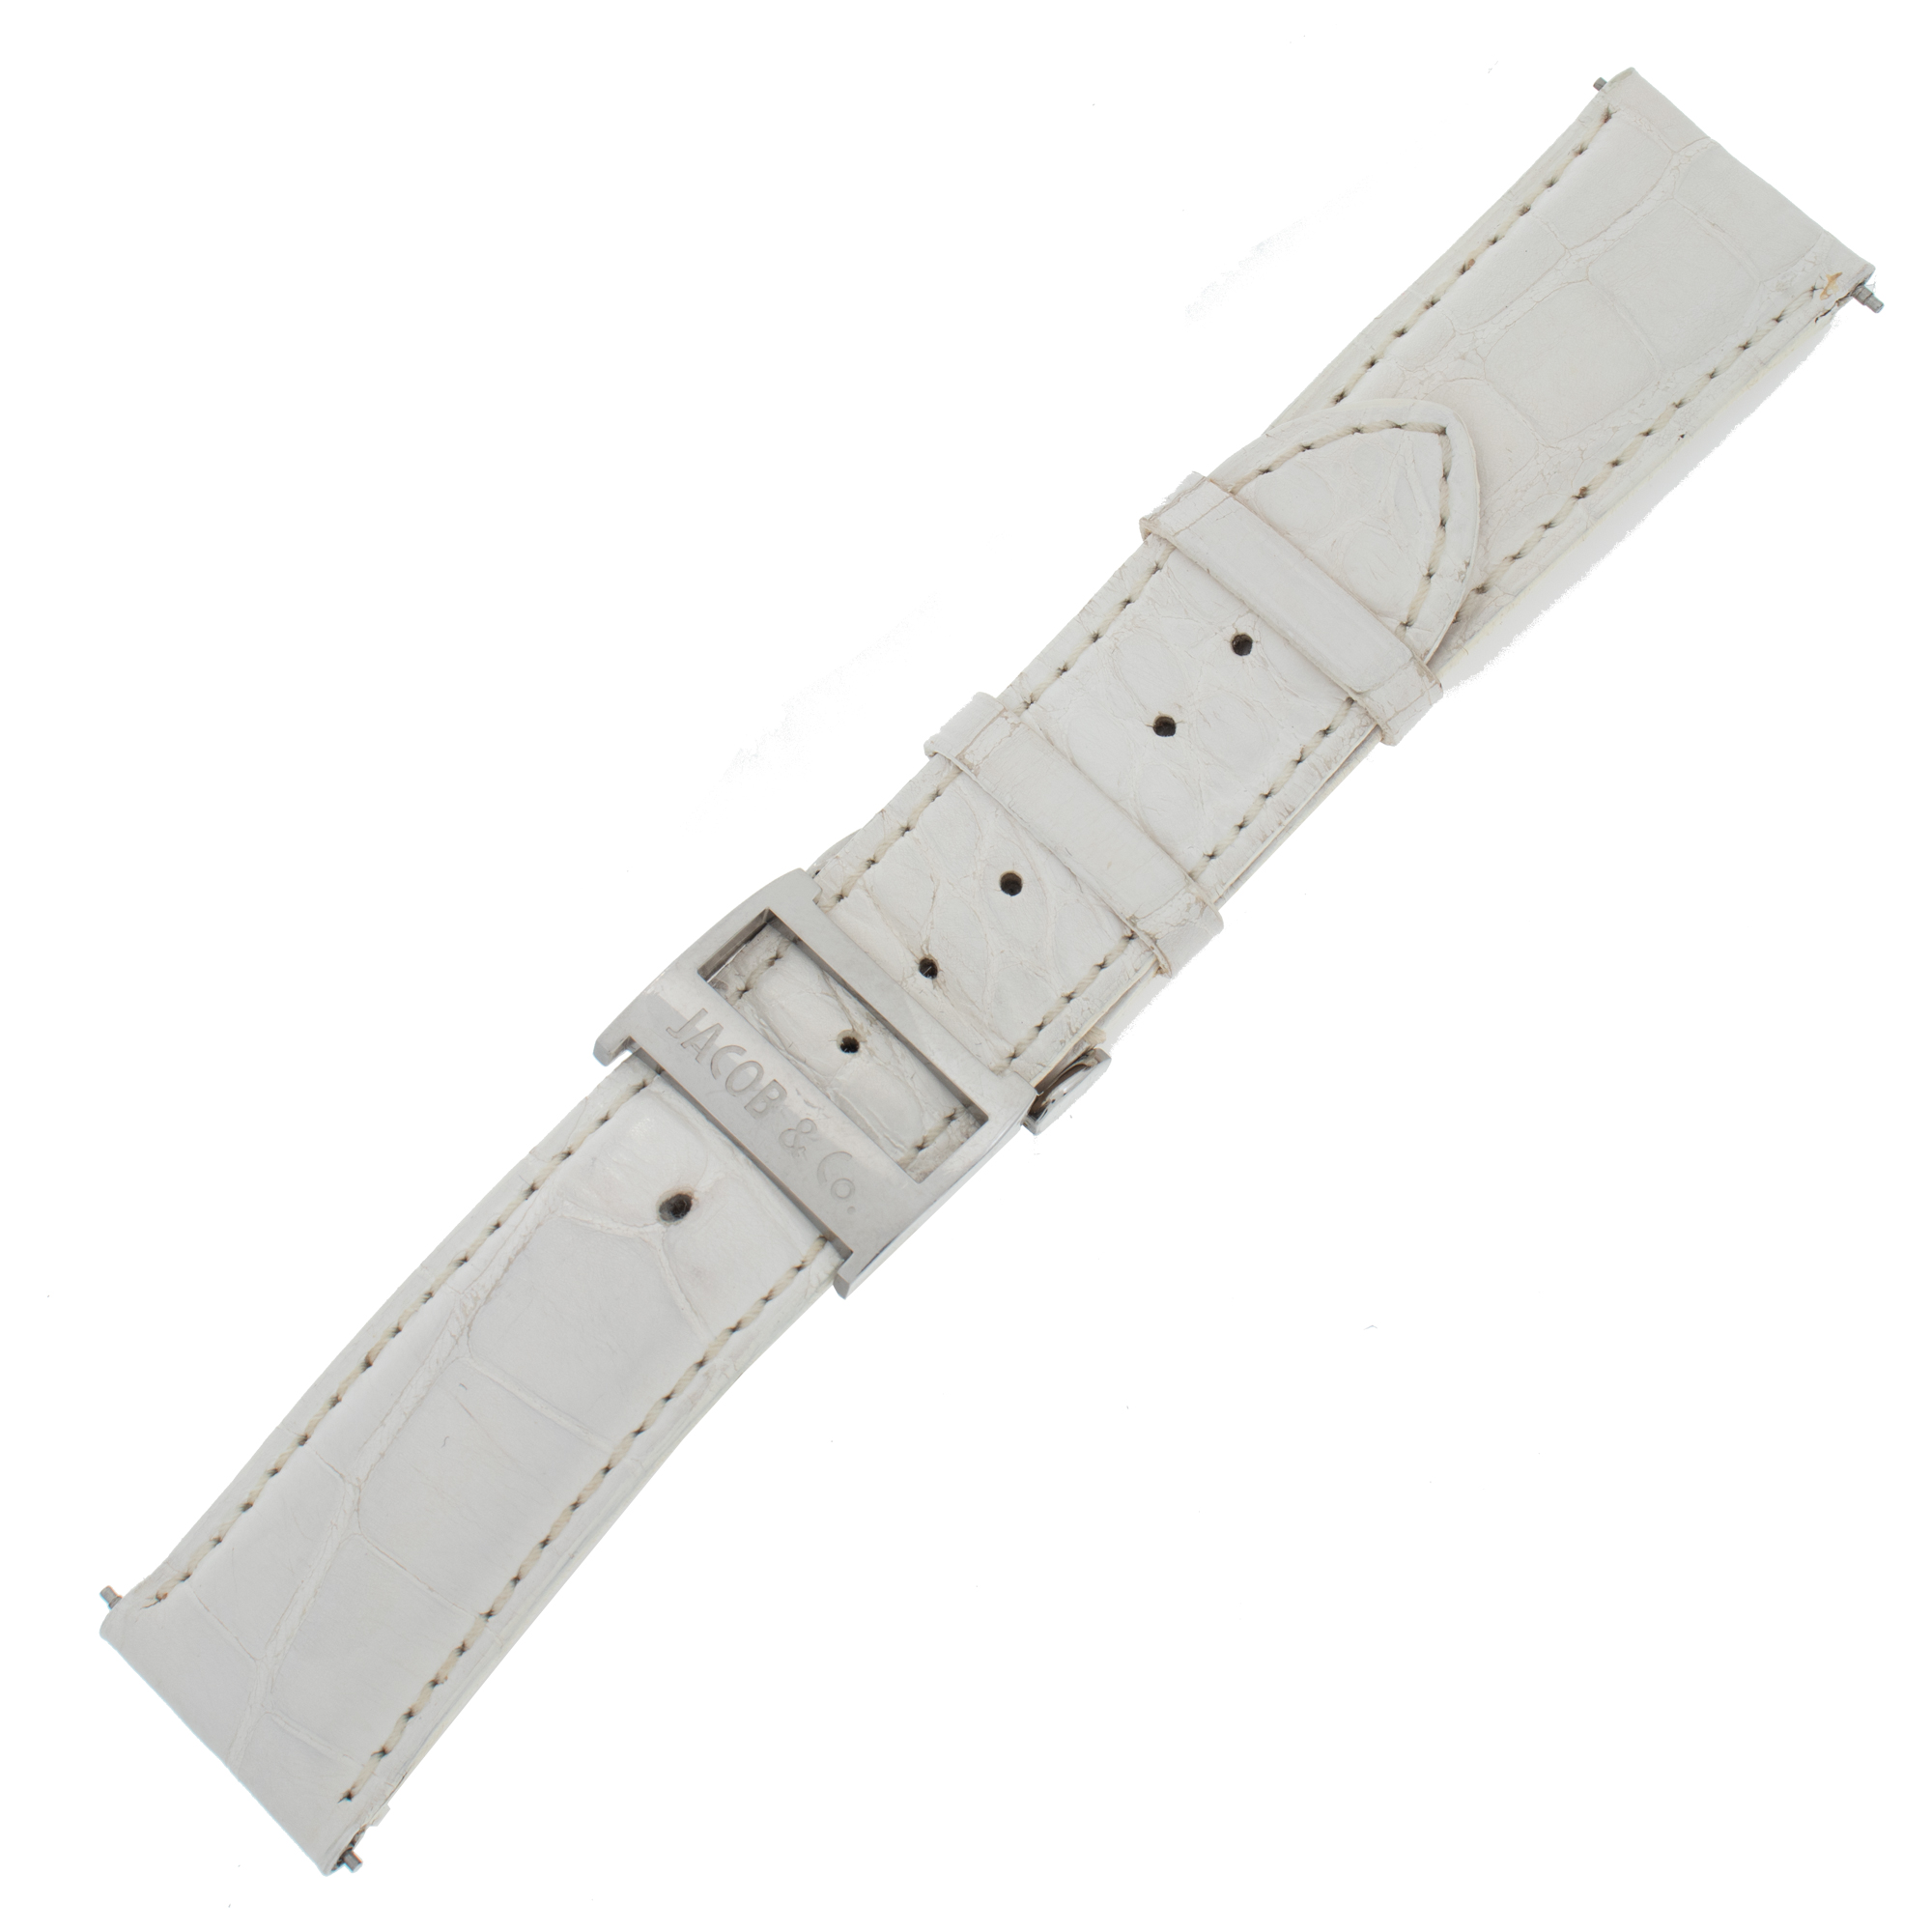 Jacob & Co. White Alligator strap with silver tang buckle (22mm x 20mm)